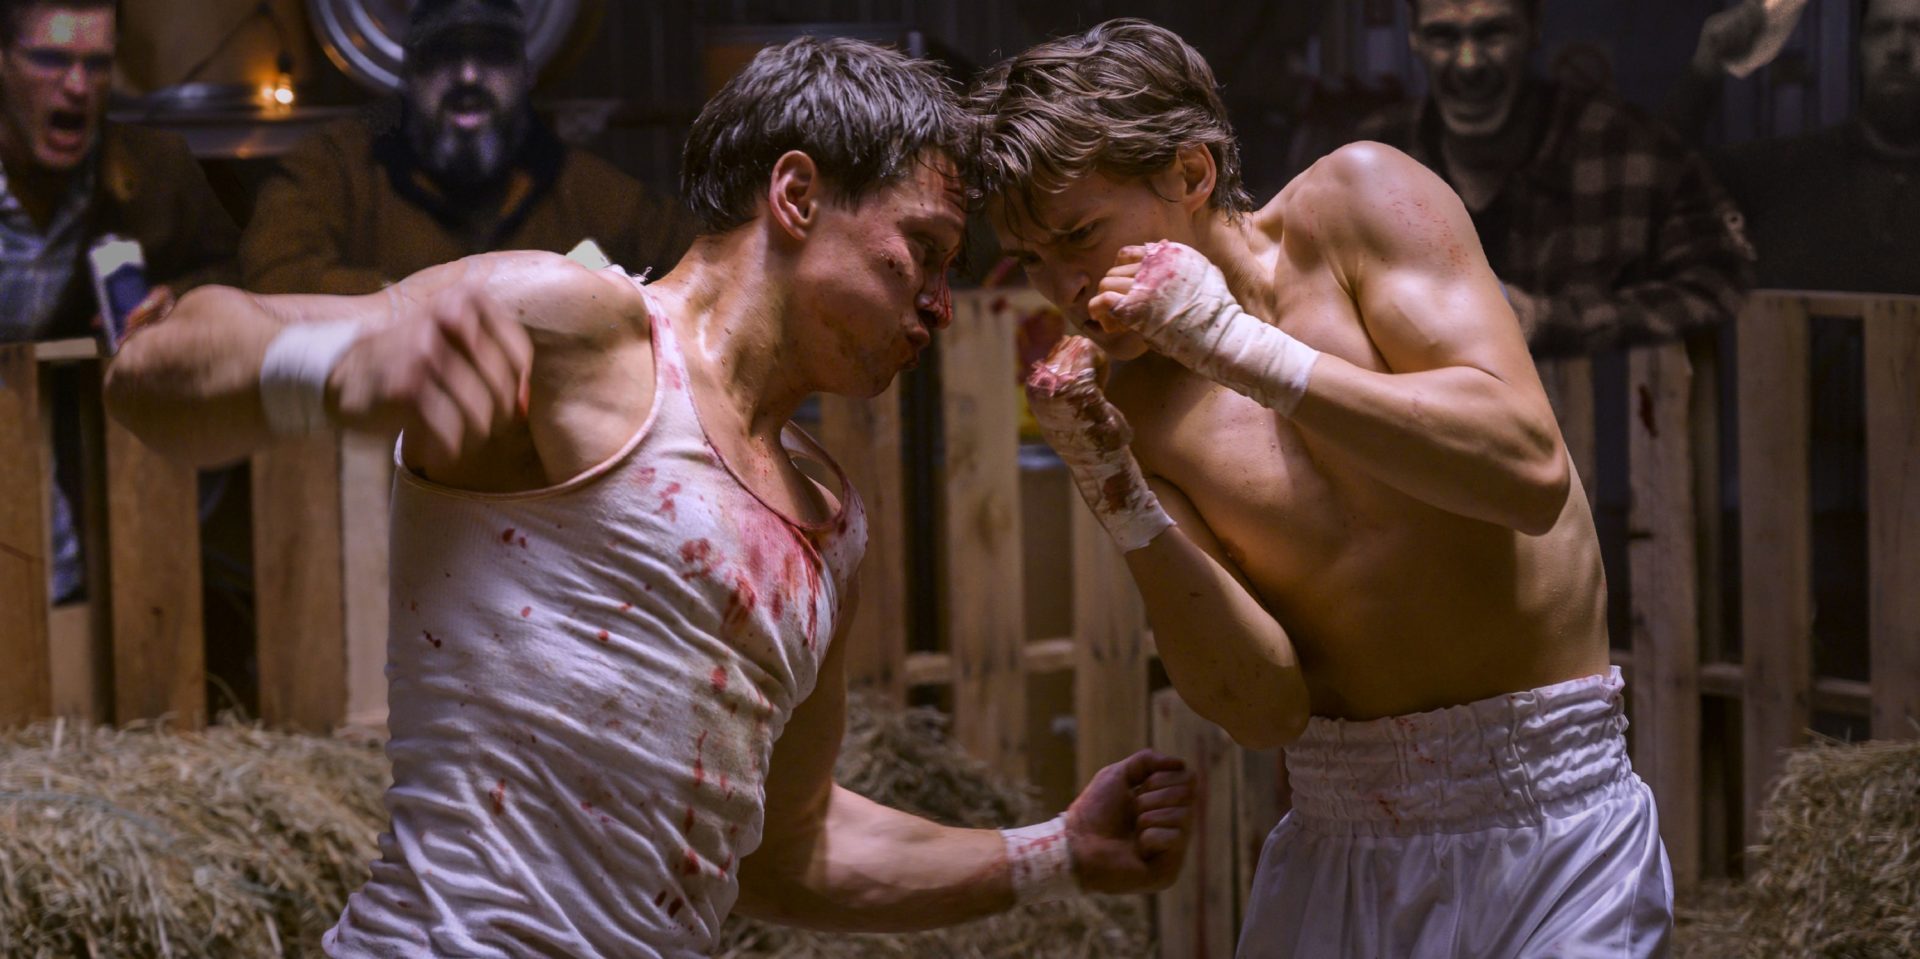 The Fight Machine, directed by Andrew Thomas Hunt Fantasia Festival Montreal review